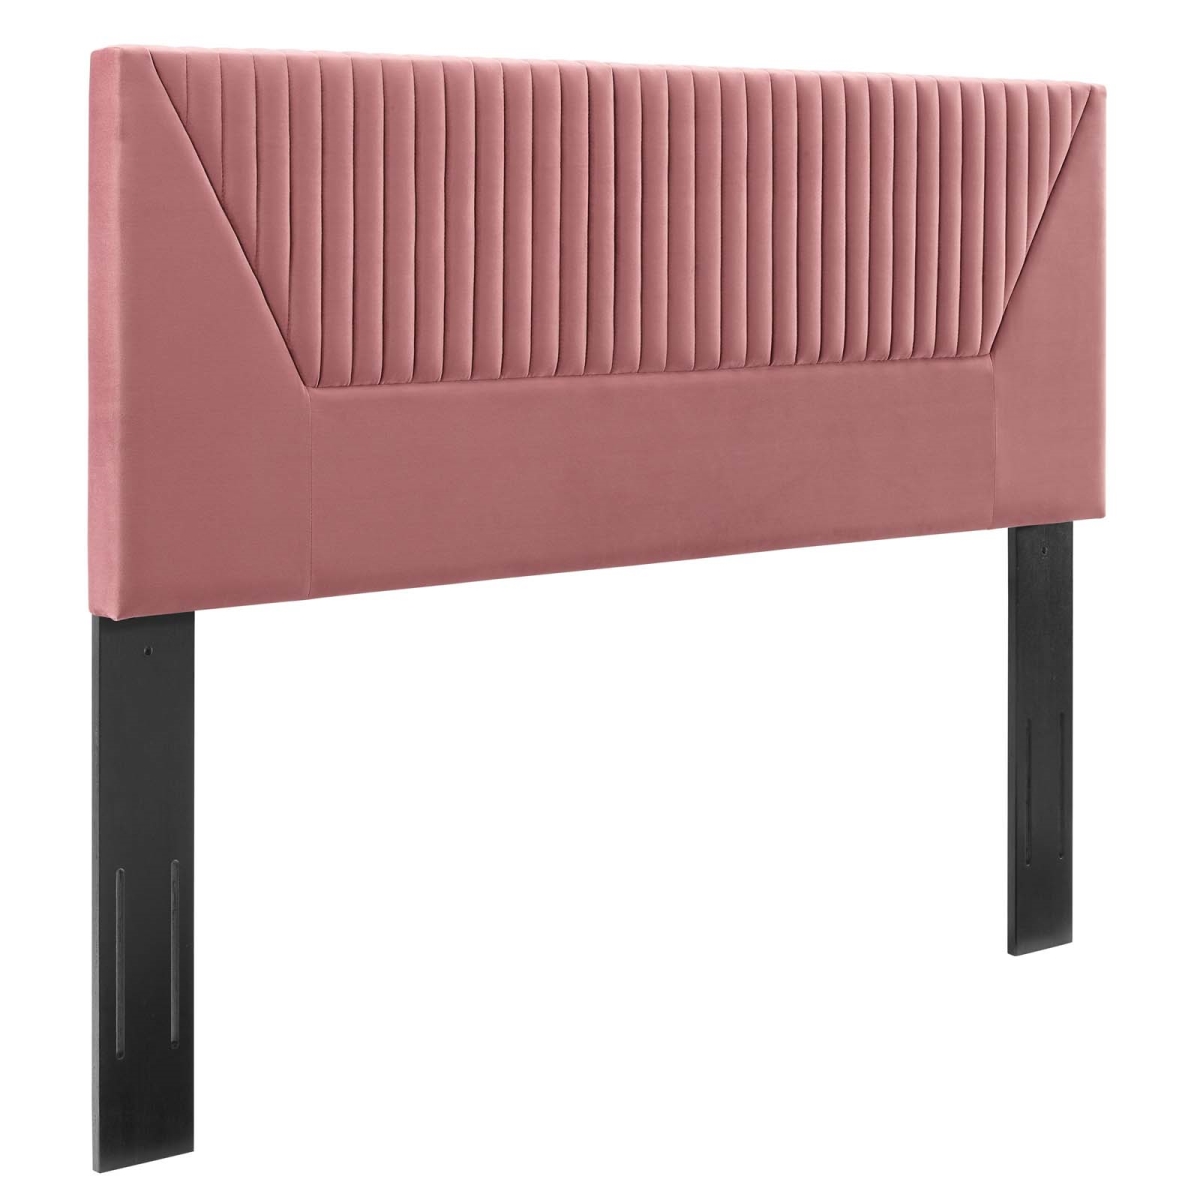 Picture of Modway Furniture MOD-6667-DUS 39 x 23.5 x 3 in. Patience Channel Tufted Performance Velvet Twin Size Headboard, Dusty Rose